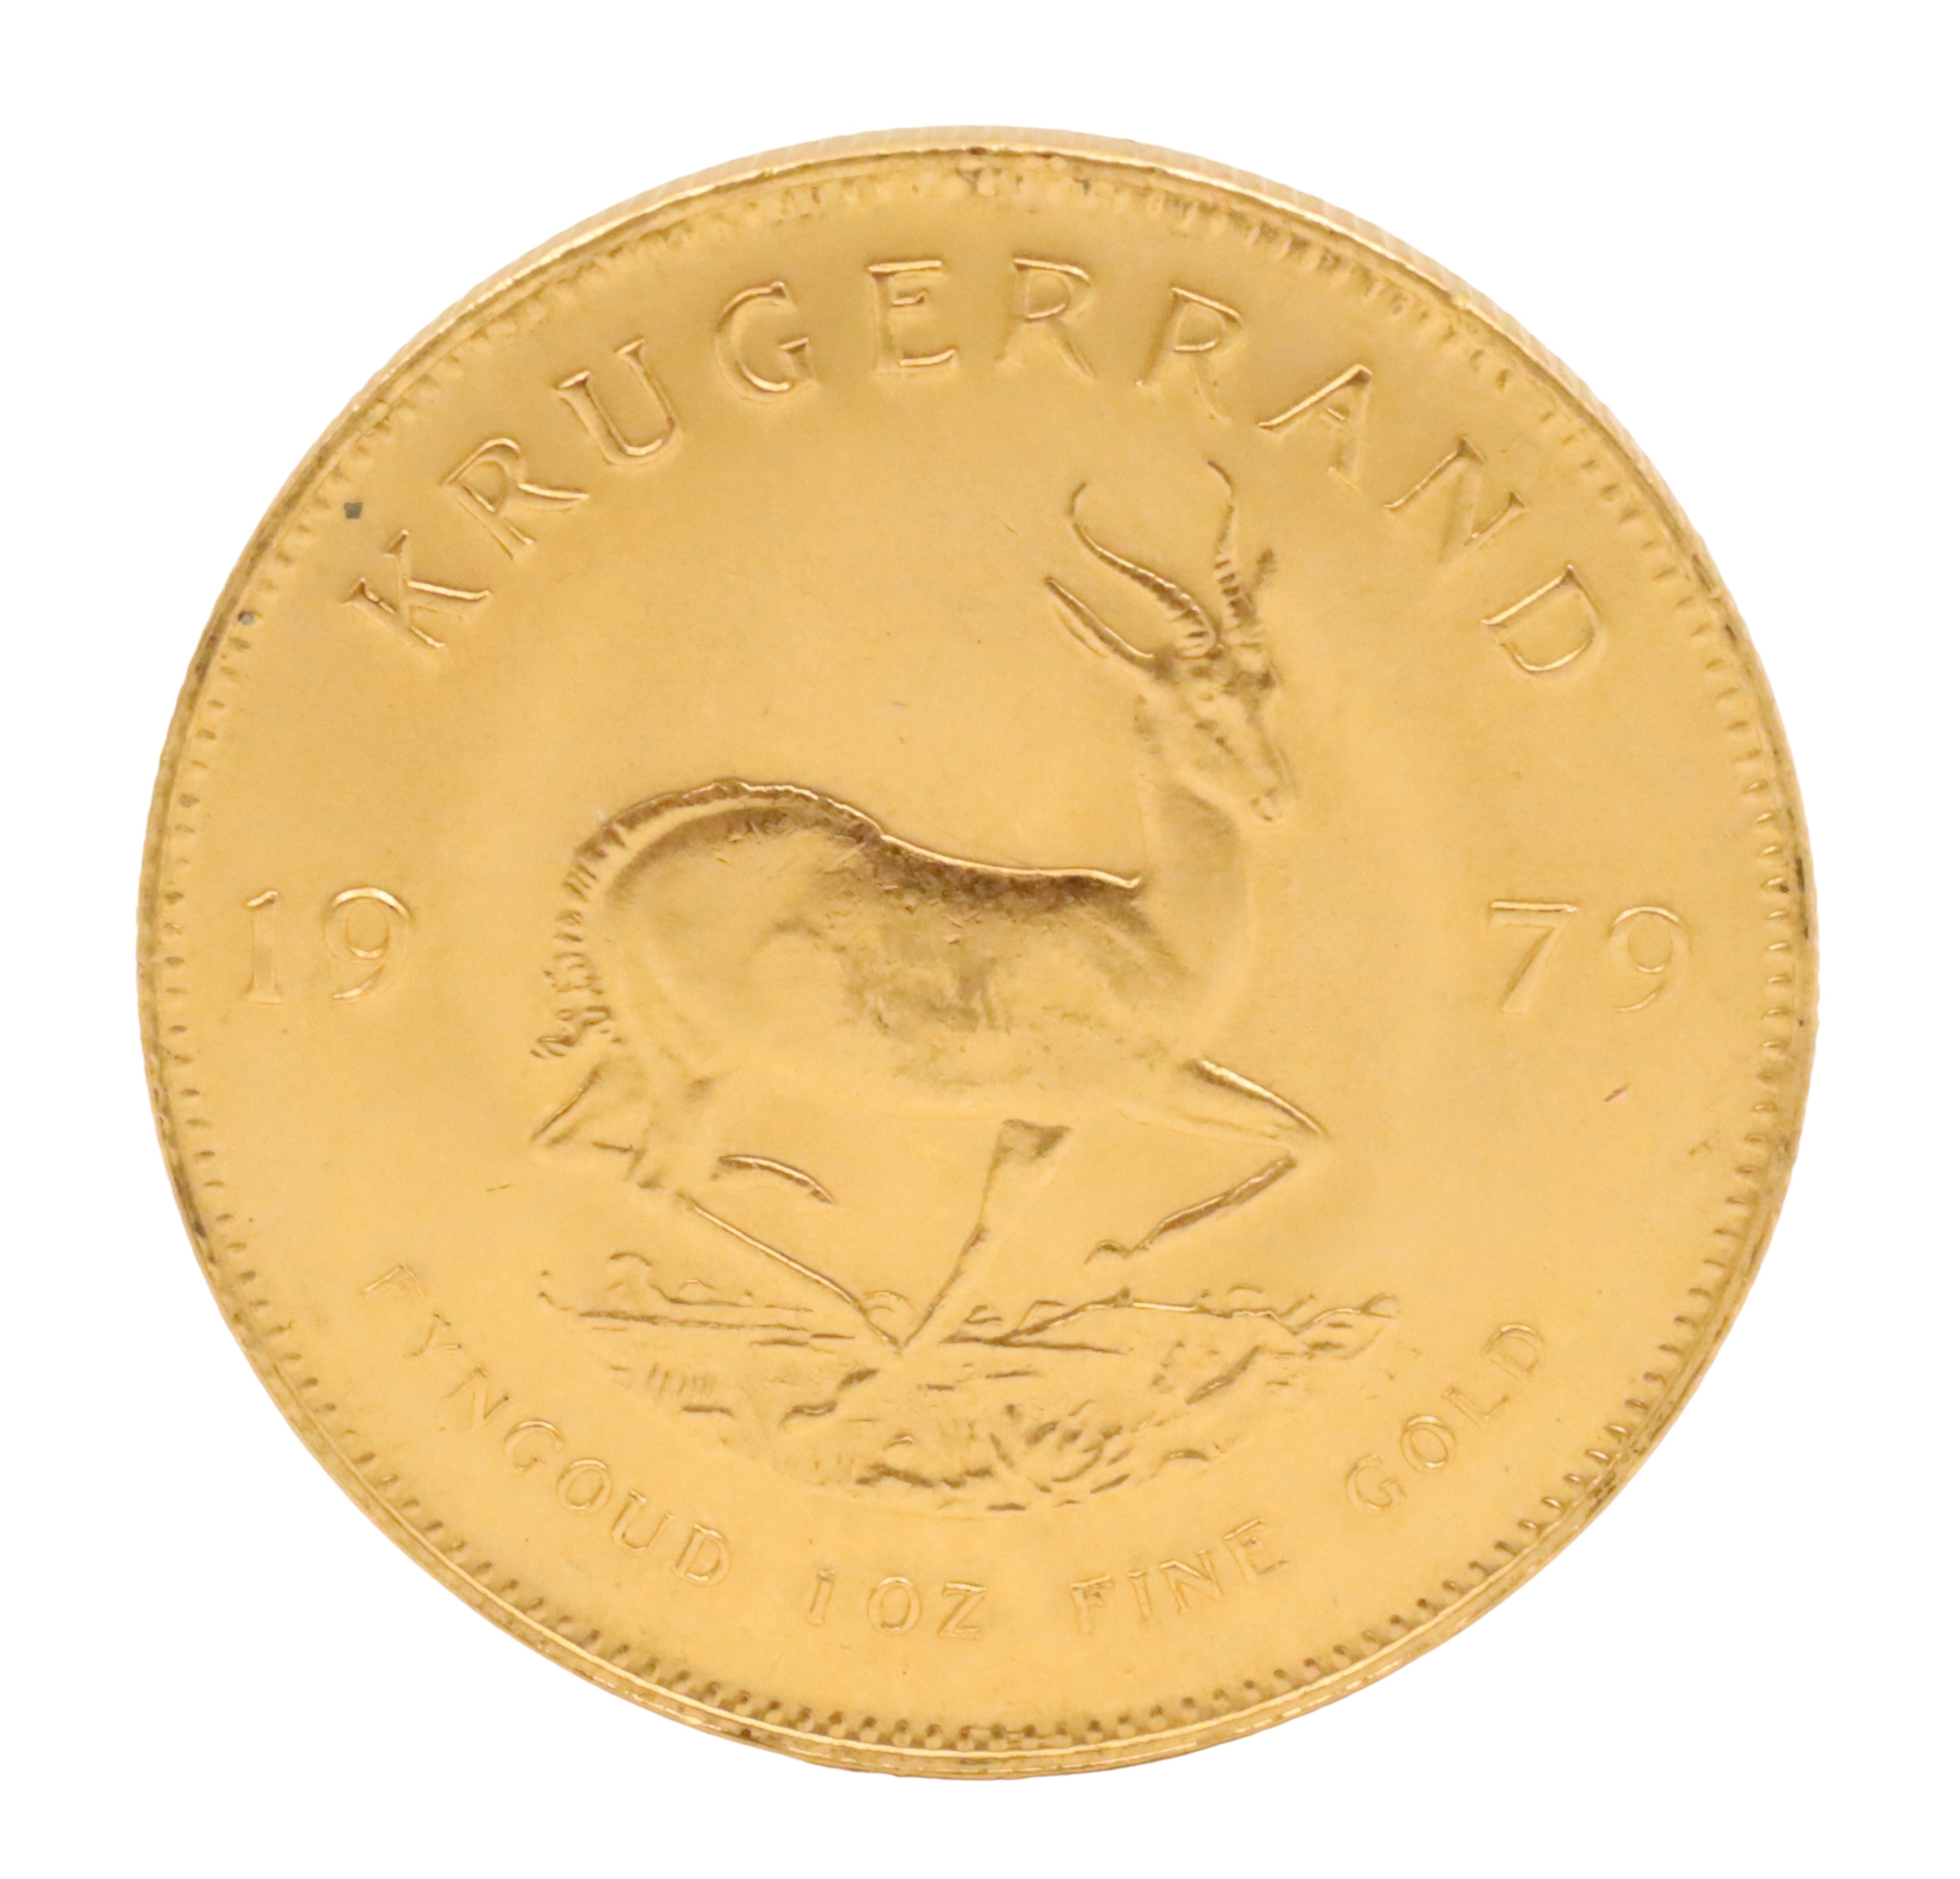 1979 ONE OUNCE GOLD SOUTH AFRICAN 35df99